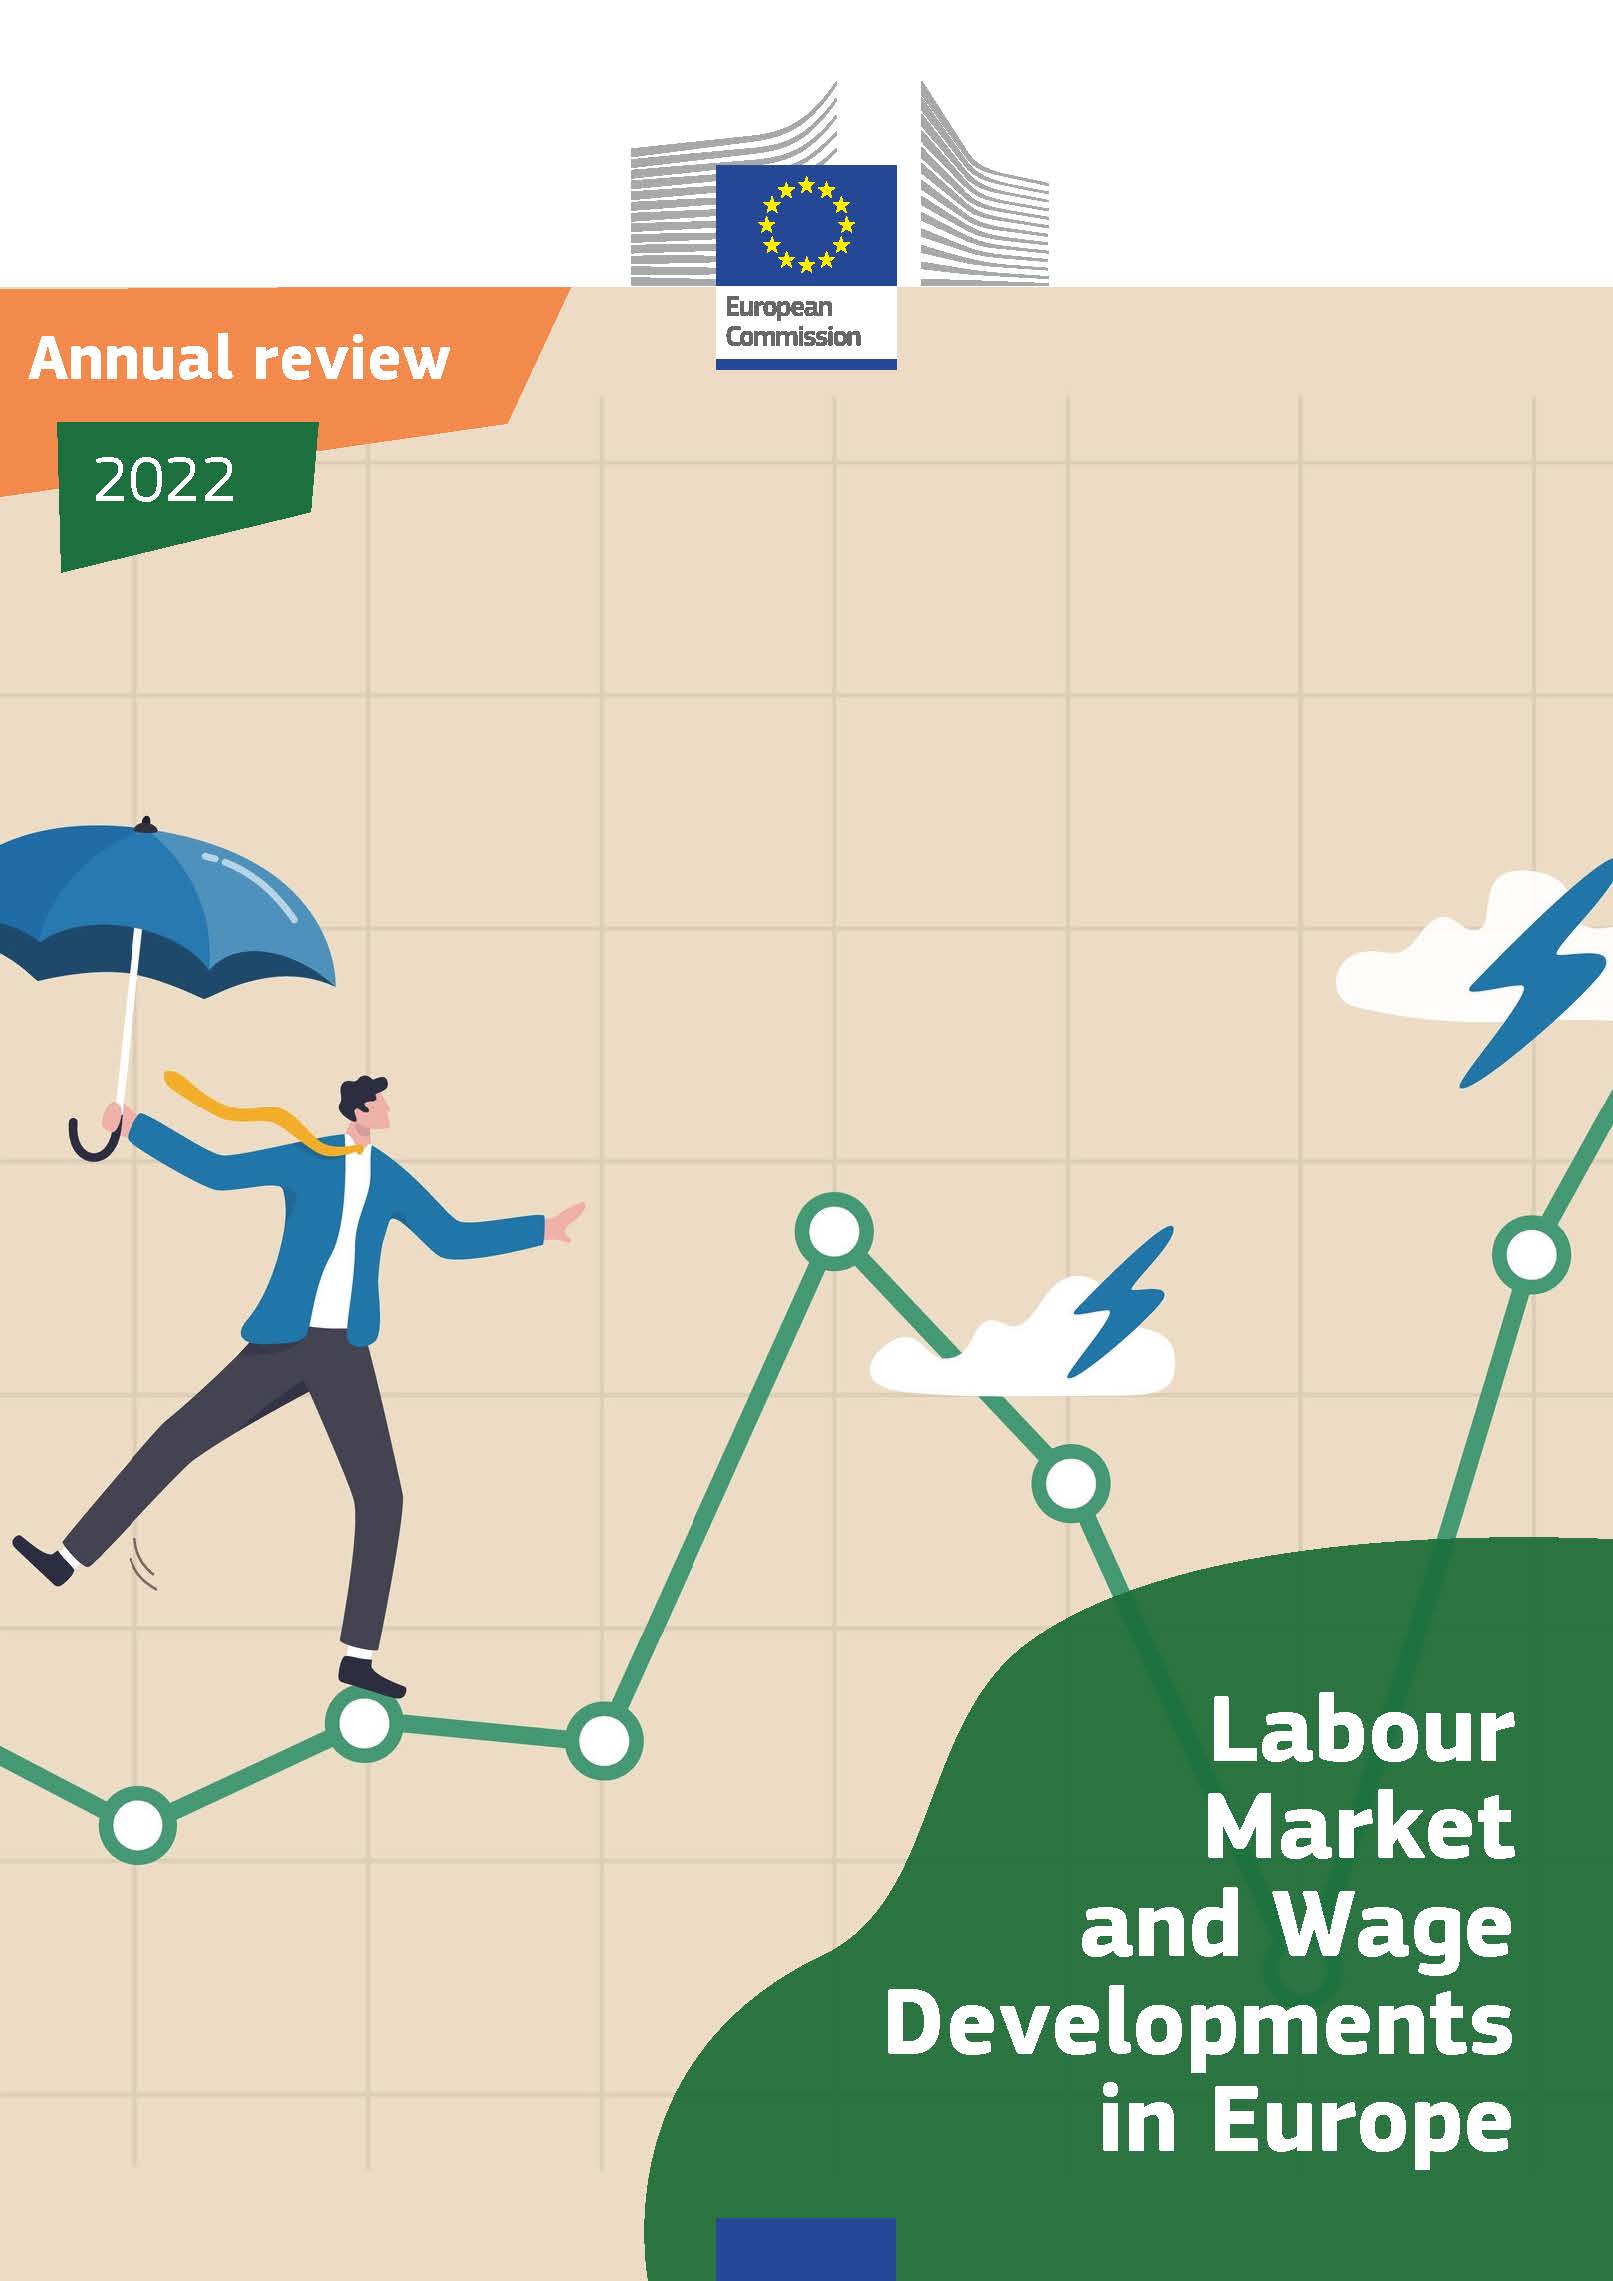 Labour Market and Wage Developments in Europe, Annual Review 2022